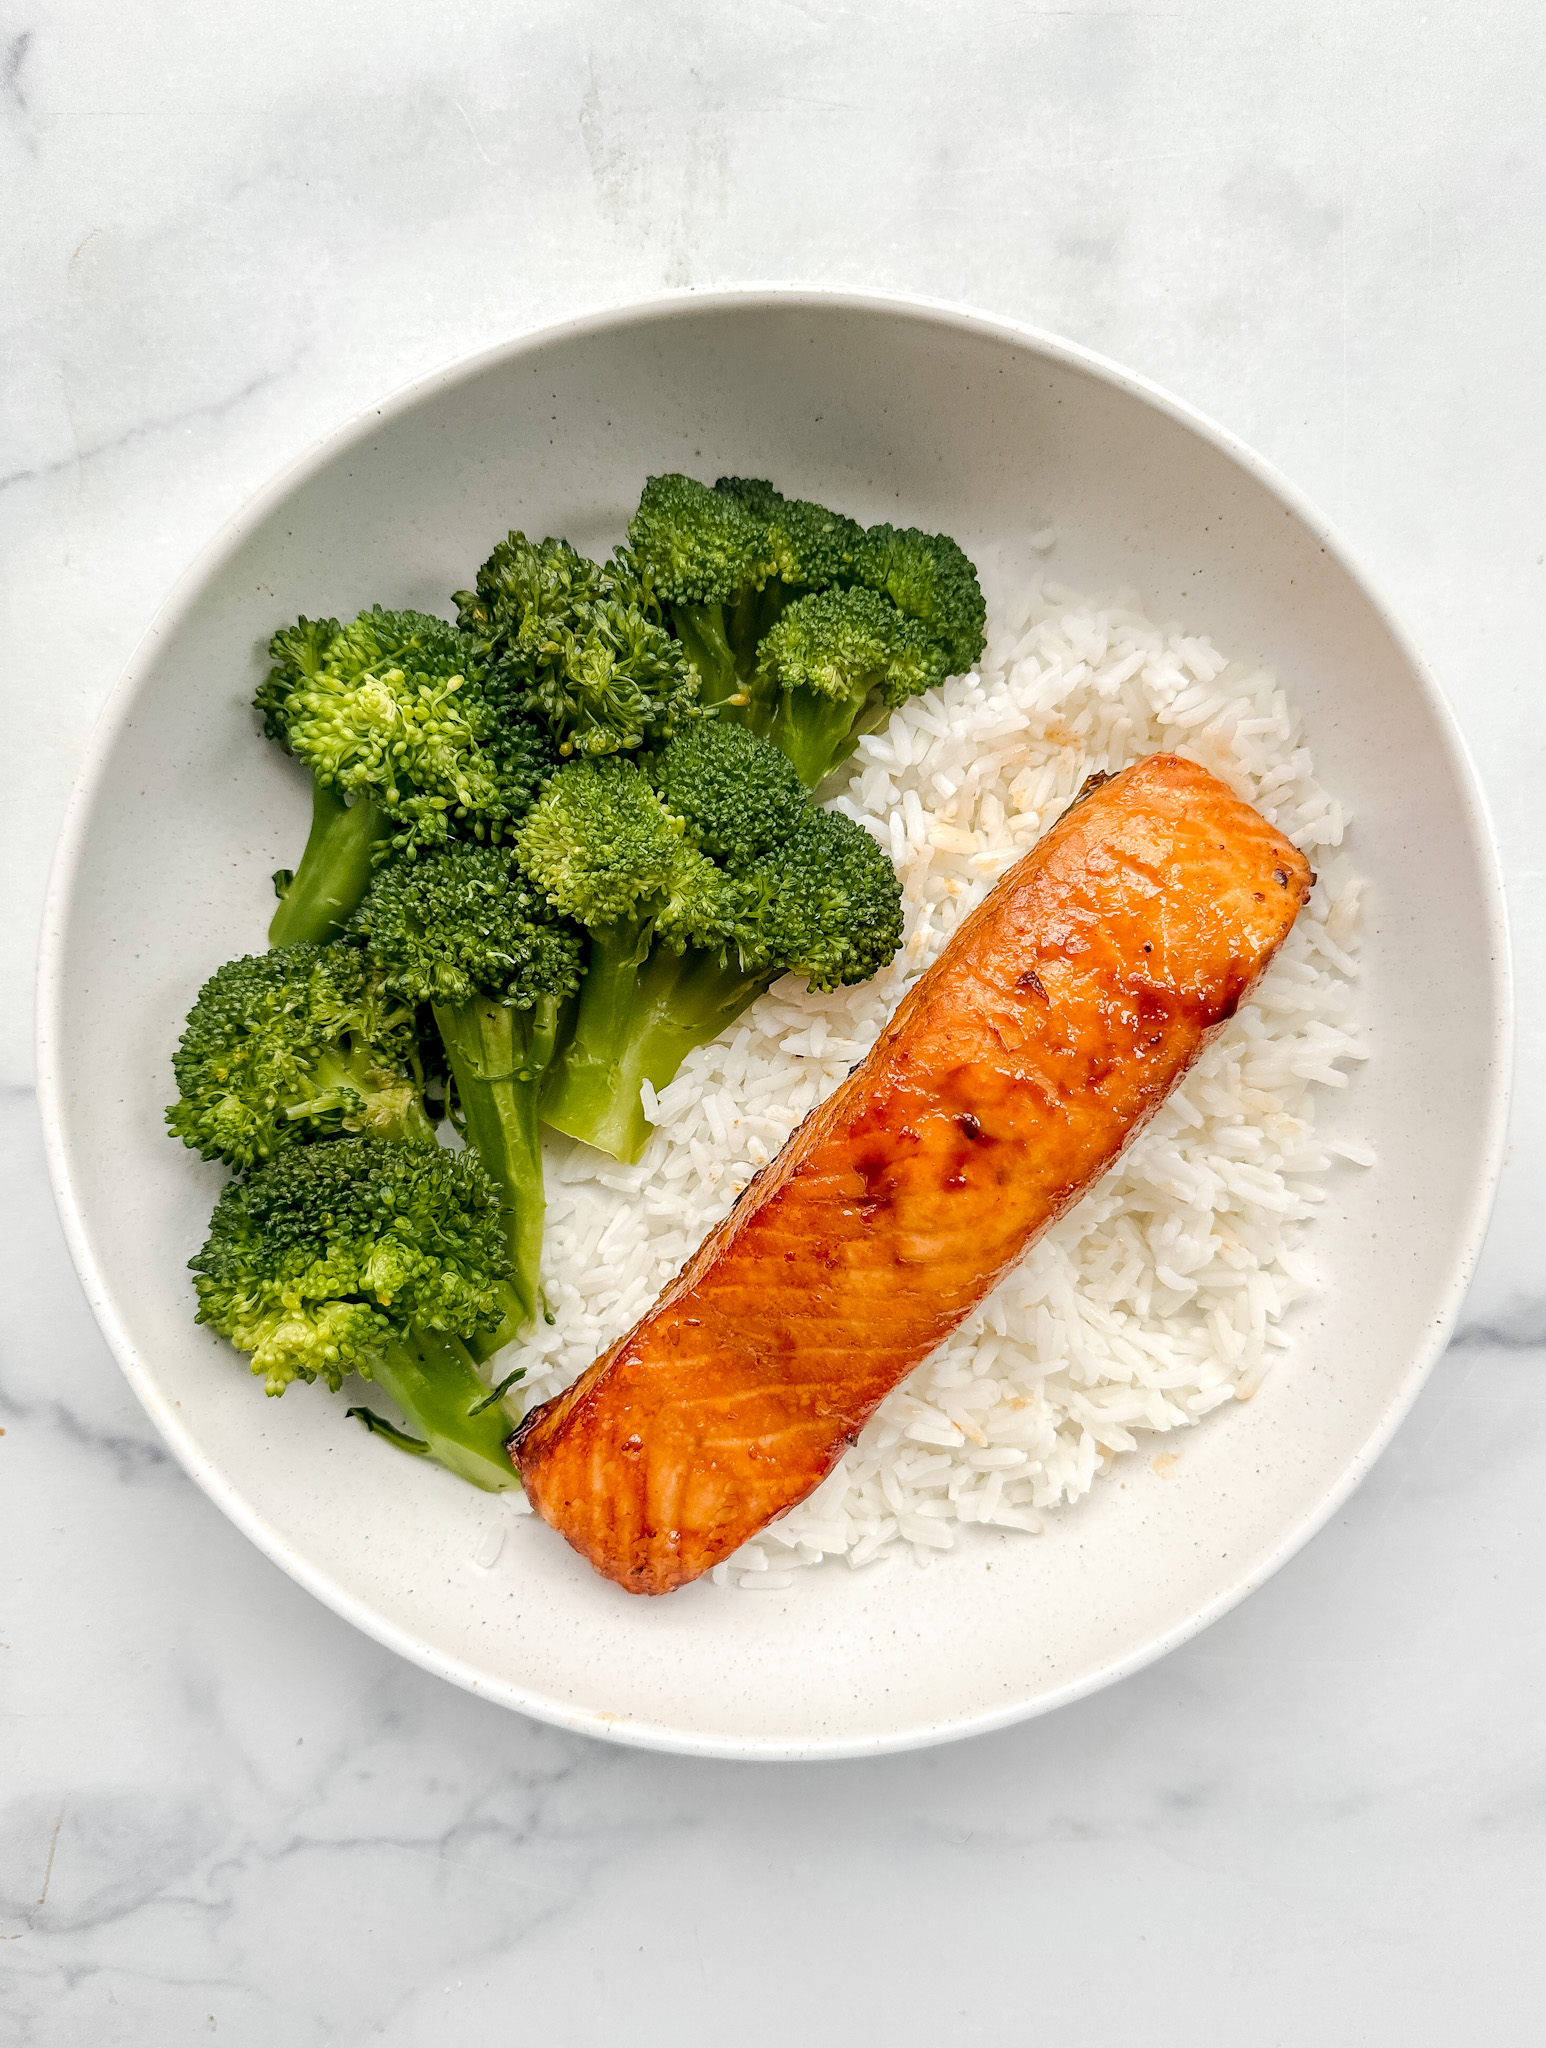 Maple-Gochujang Salmon (Air-Fryer and Oven)! (Gluten-Free, Dairy-Free, Paleo)